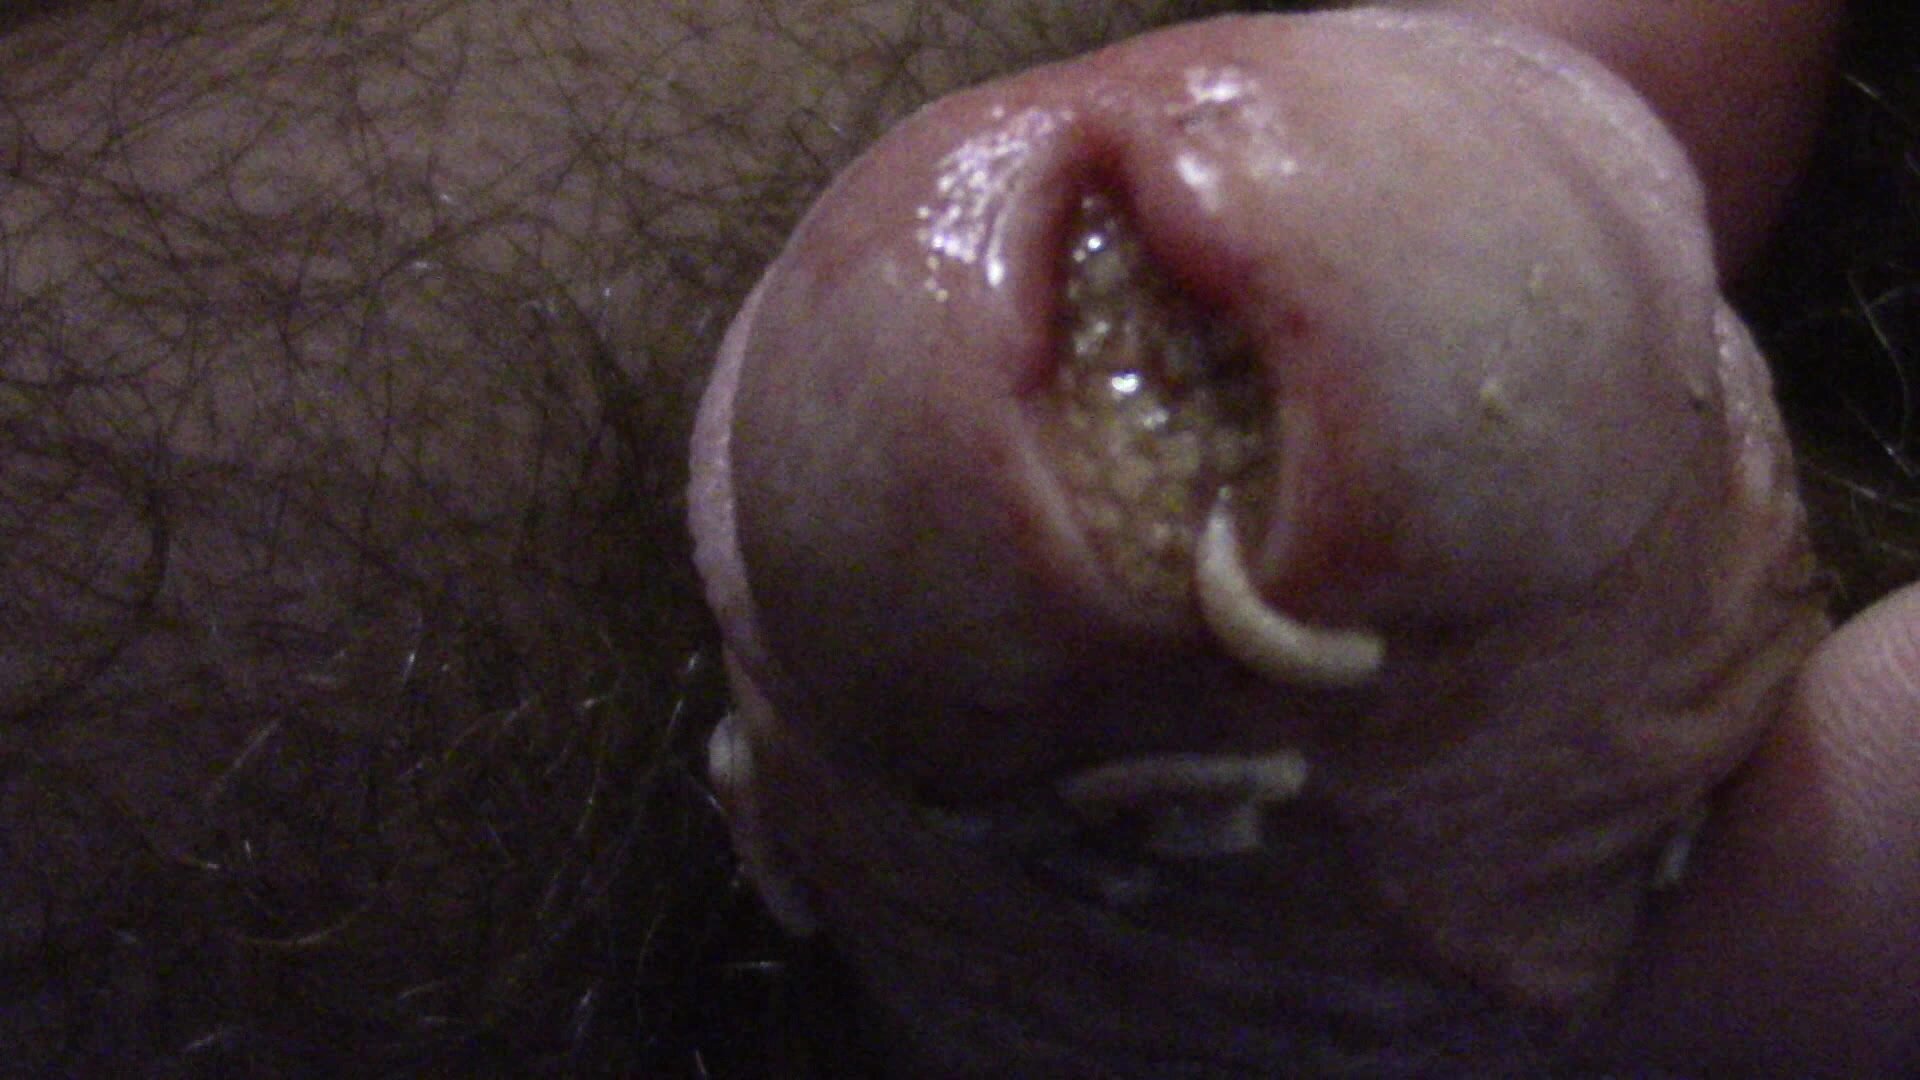 Maggots packed in cock hole